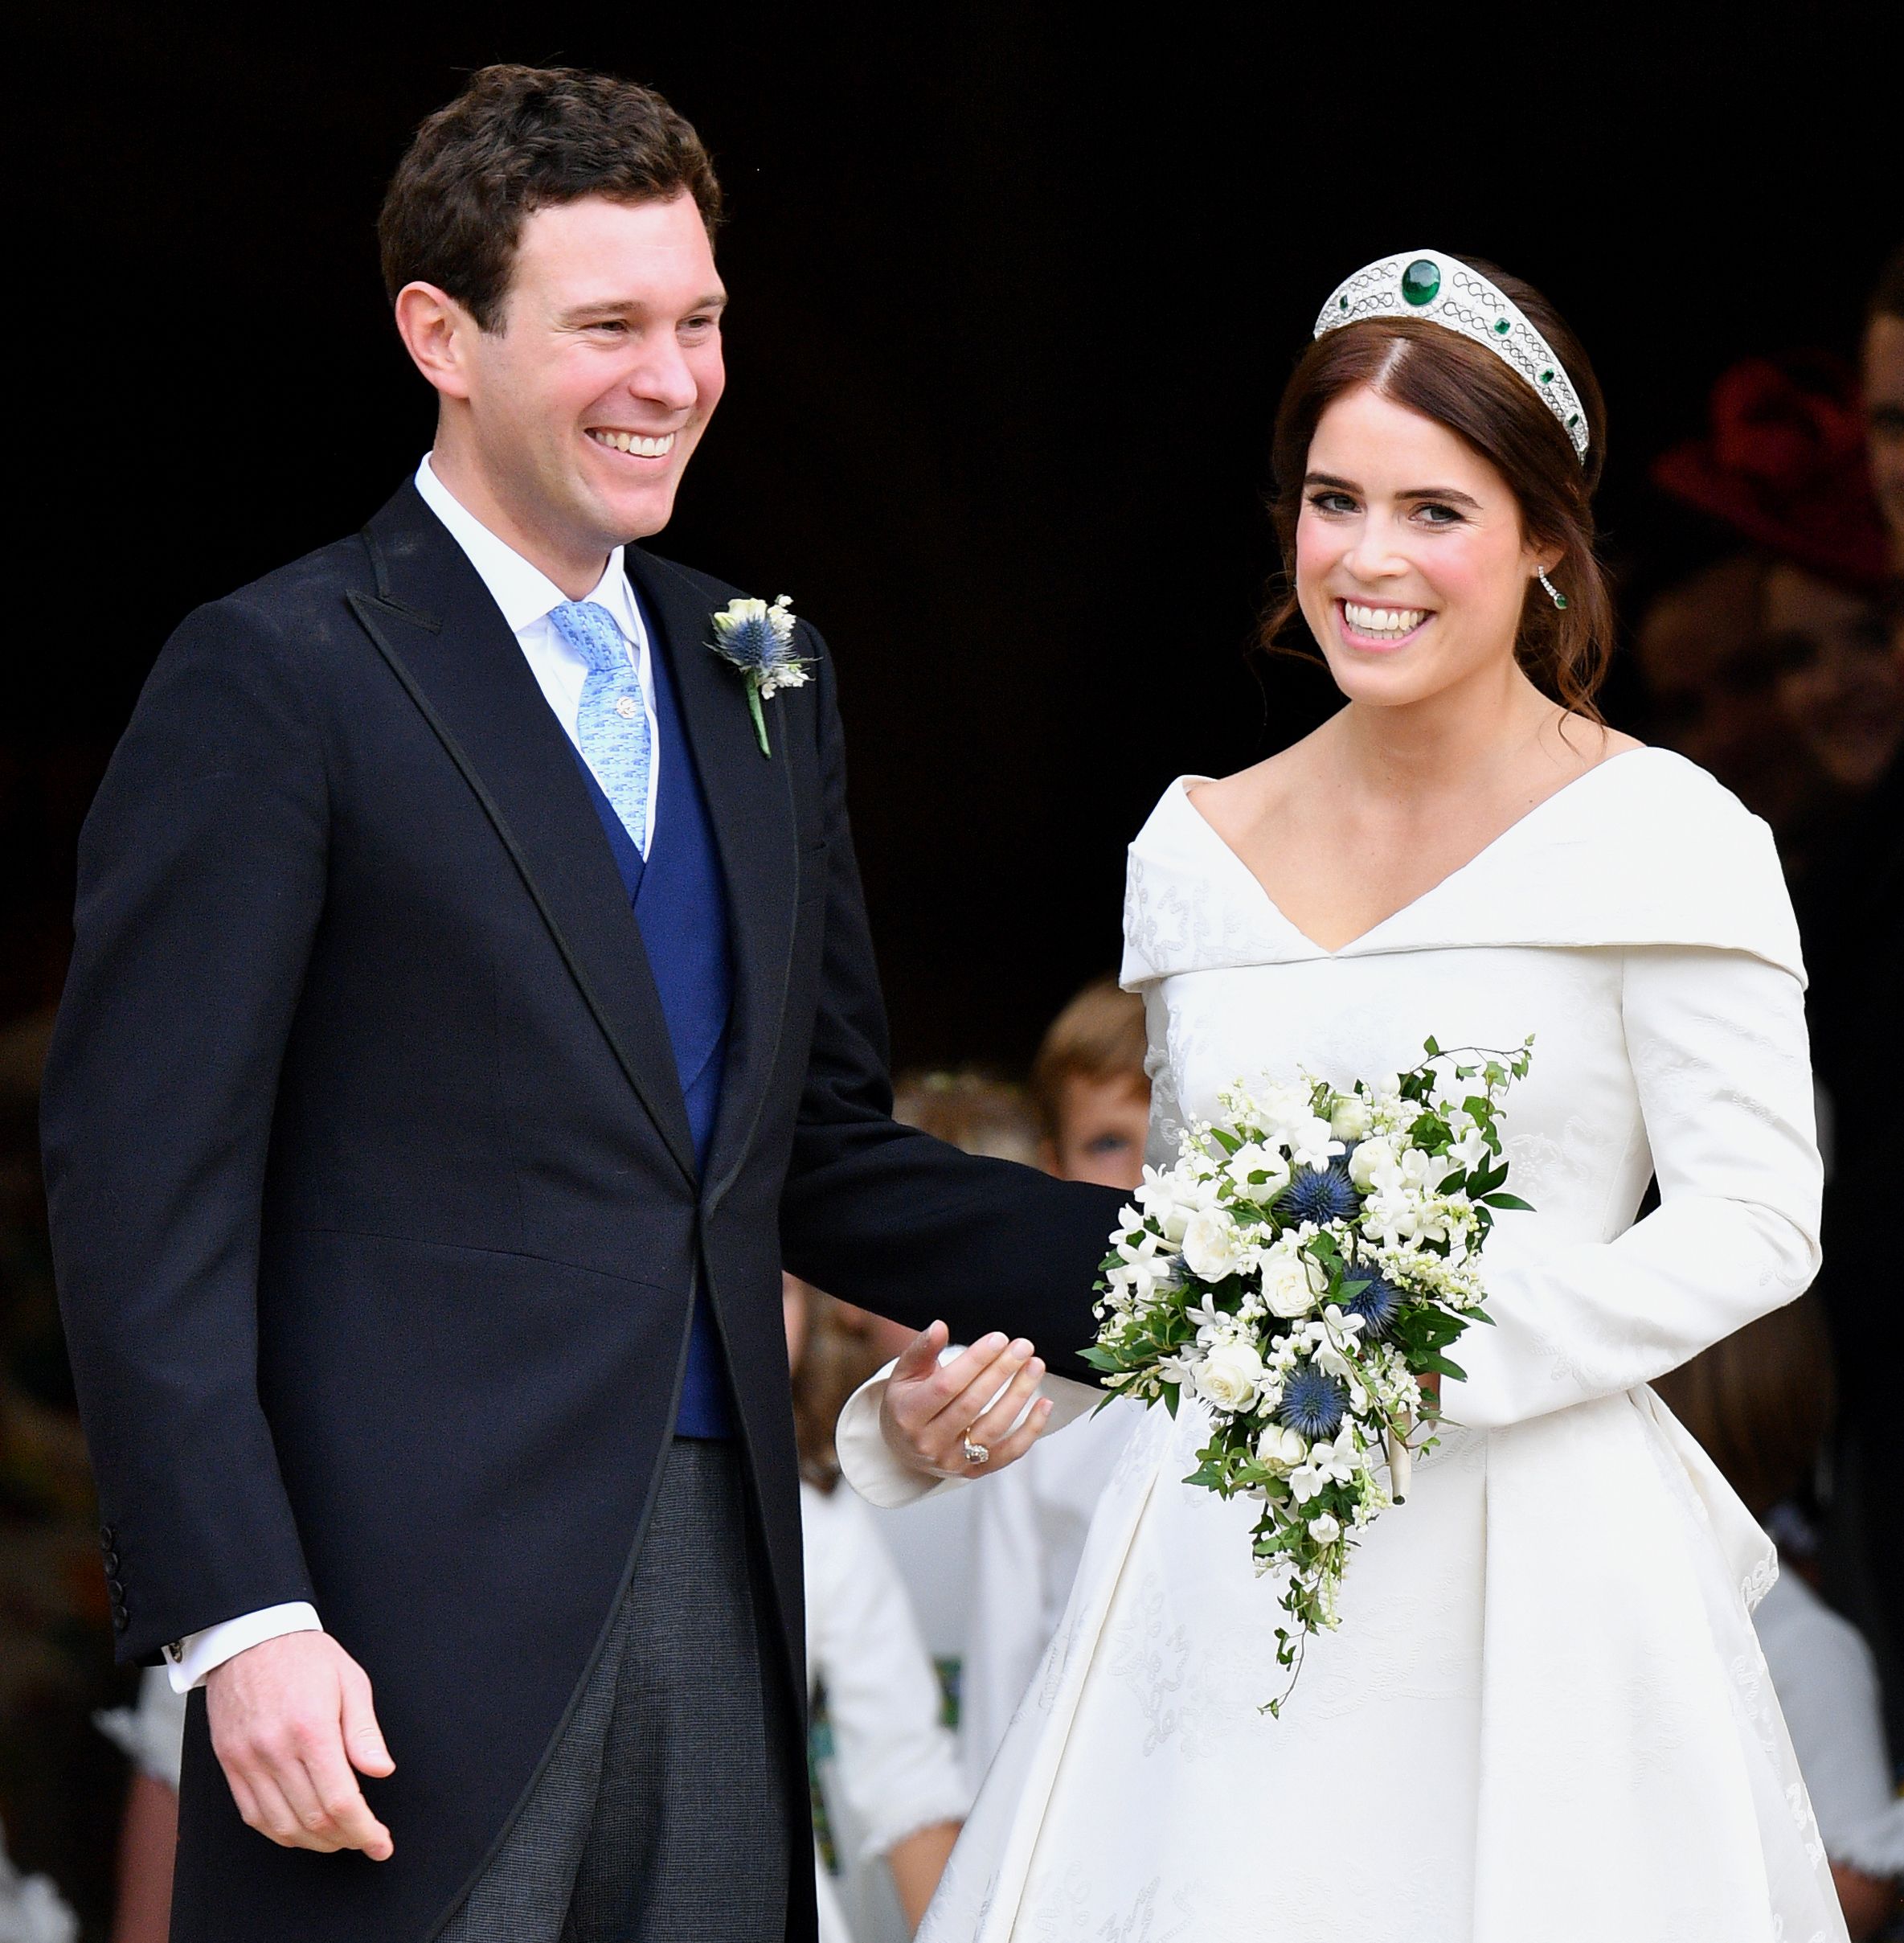 Princess Eugenie and Jack Brooksbank leaving St George's Chapel after their wedding on October 12, 2018 in Windsor, England | Source: Getty Images